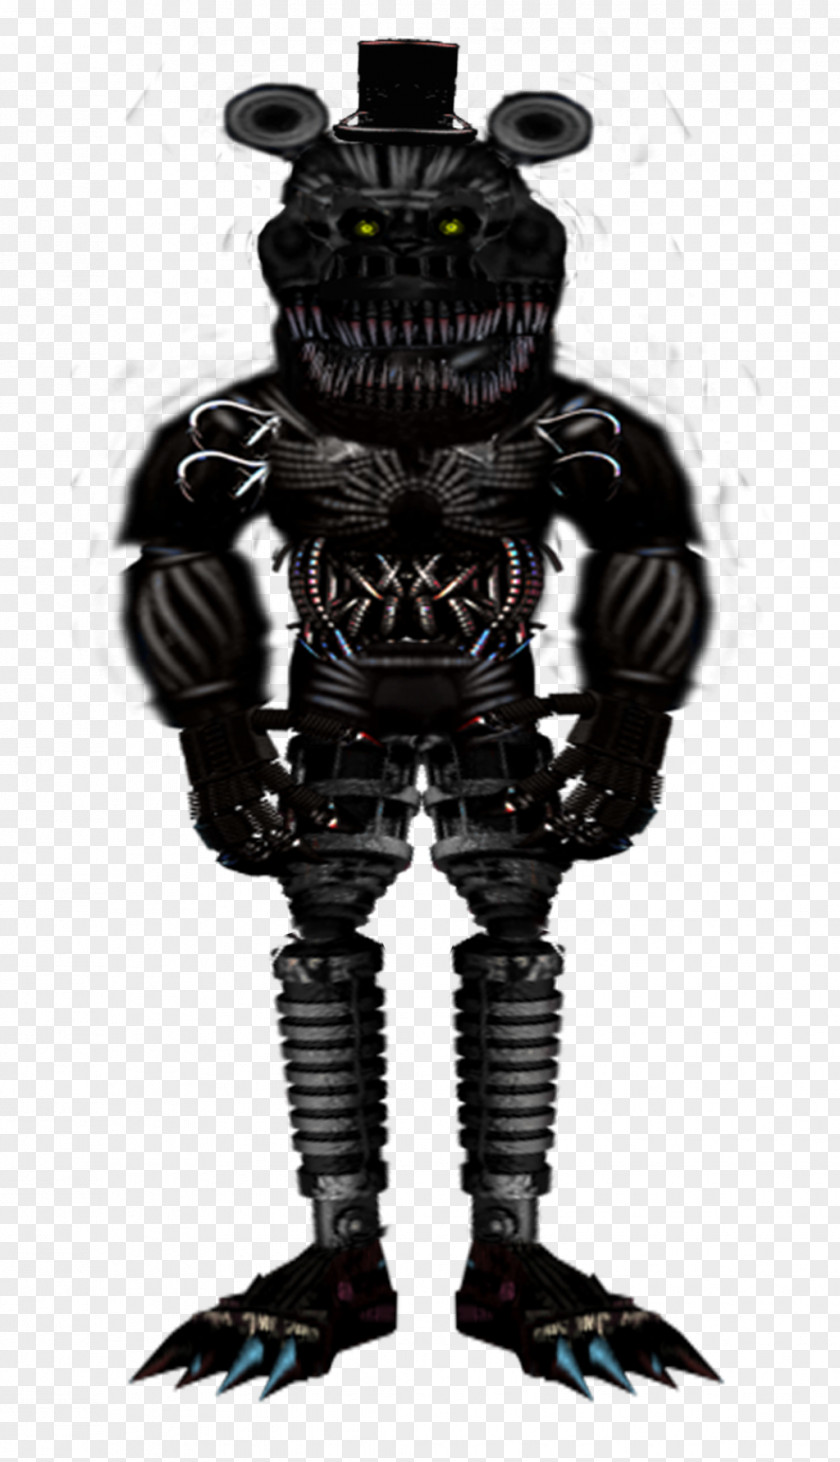 Five Nights At Freddy's: Sister Location Freddy's 4 2 Nightmare DeviantArt PNG